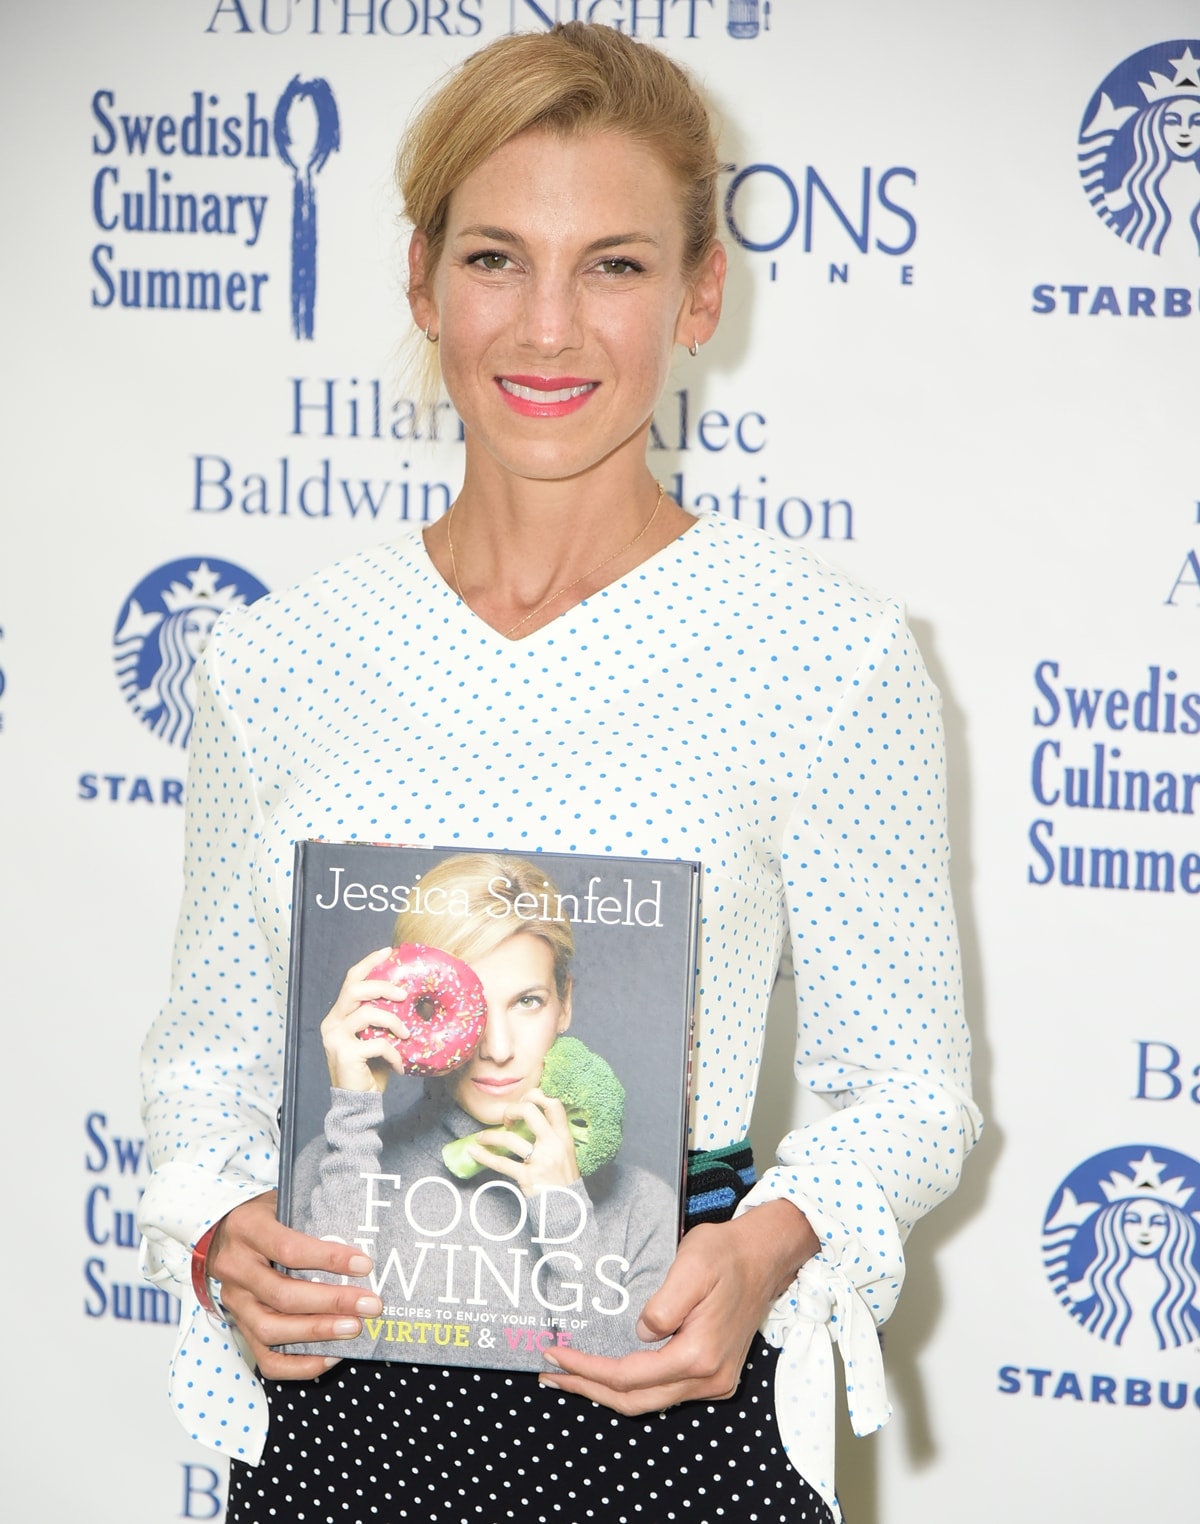 Holding a copy of her book Food Swings: 125+ Recipes to Enjoy Your Life of Virtue & Vice: A Cookbook, Jessica Seinfeld was accused by cookbook author Missy Chase Lapine of stealing her idea for a book